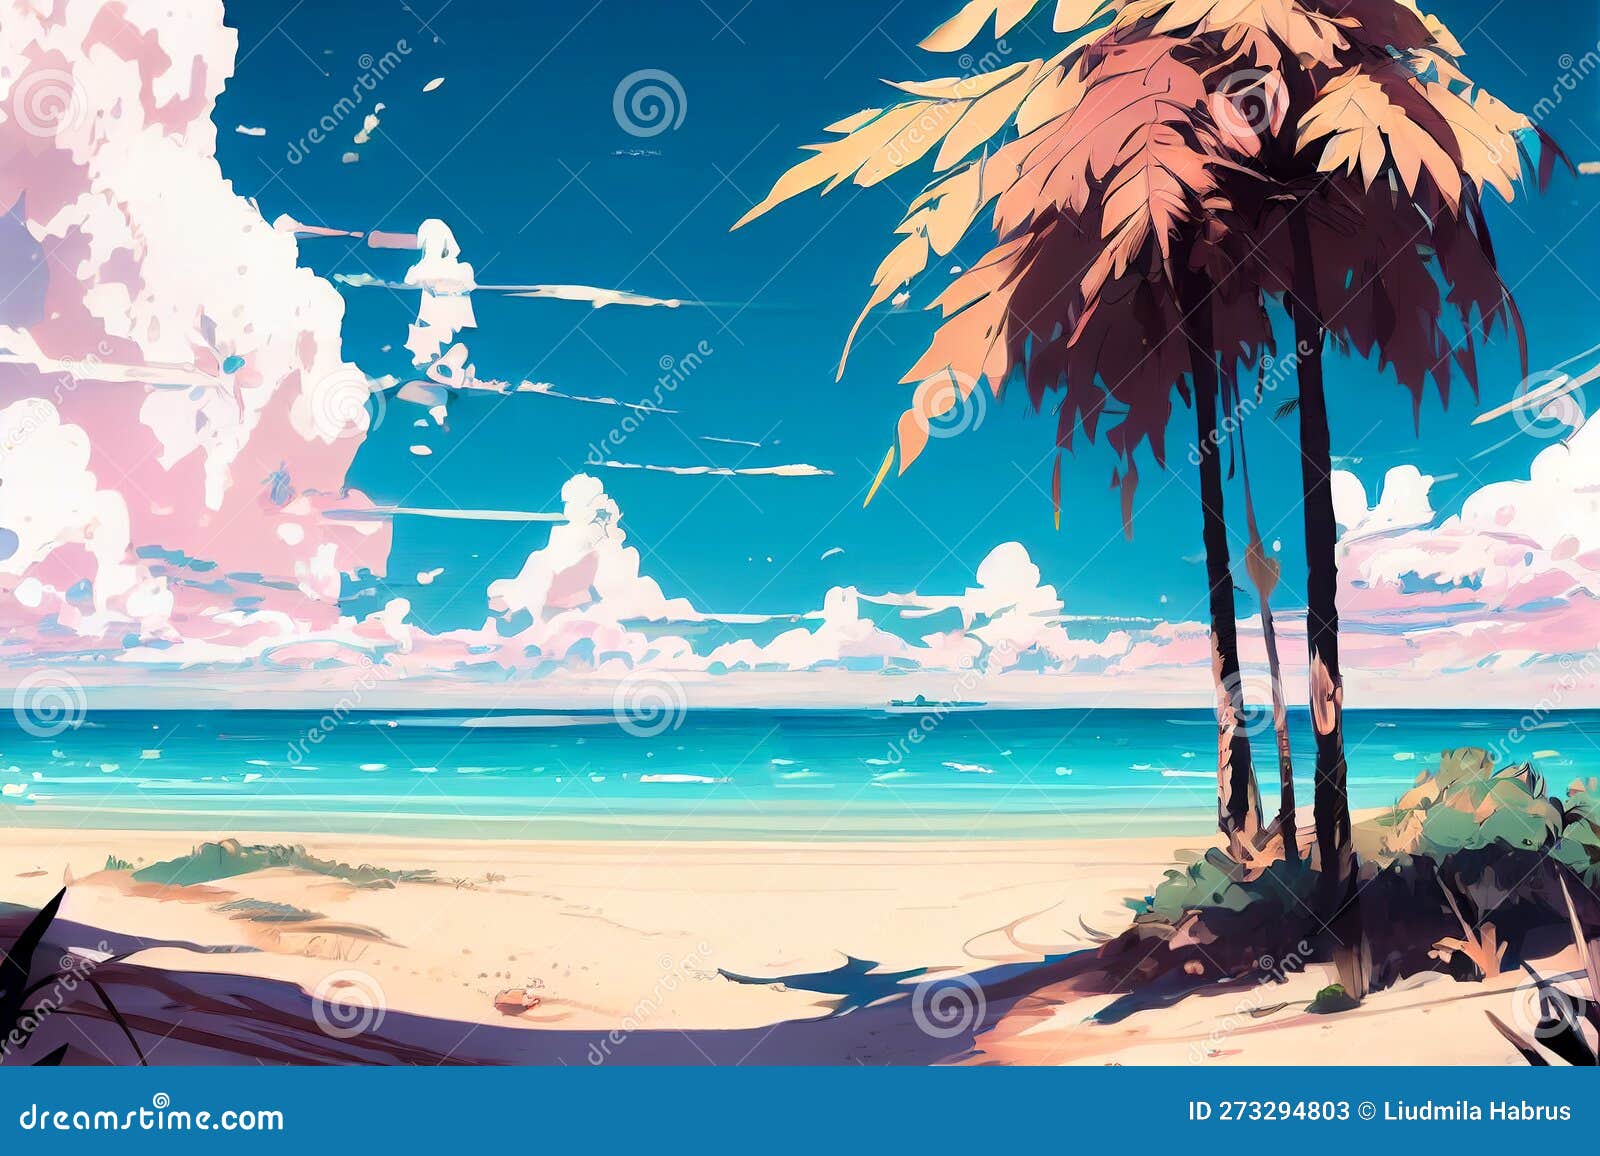 Anime Beach Scene with Palm Trees and a House, AI Stock Image - Image of  beach, outdoors: 290359589